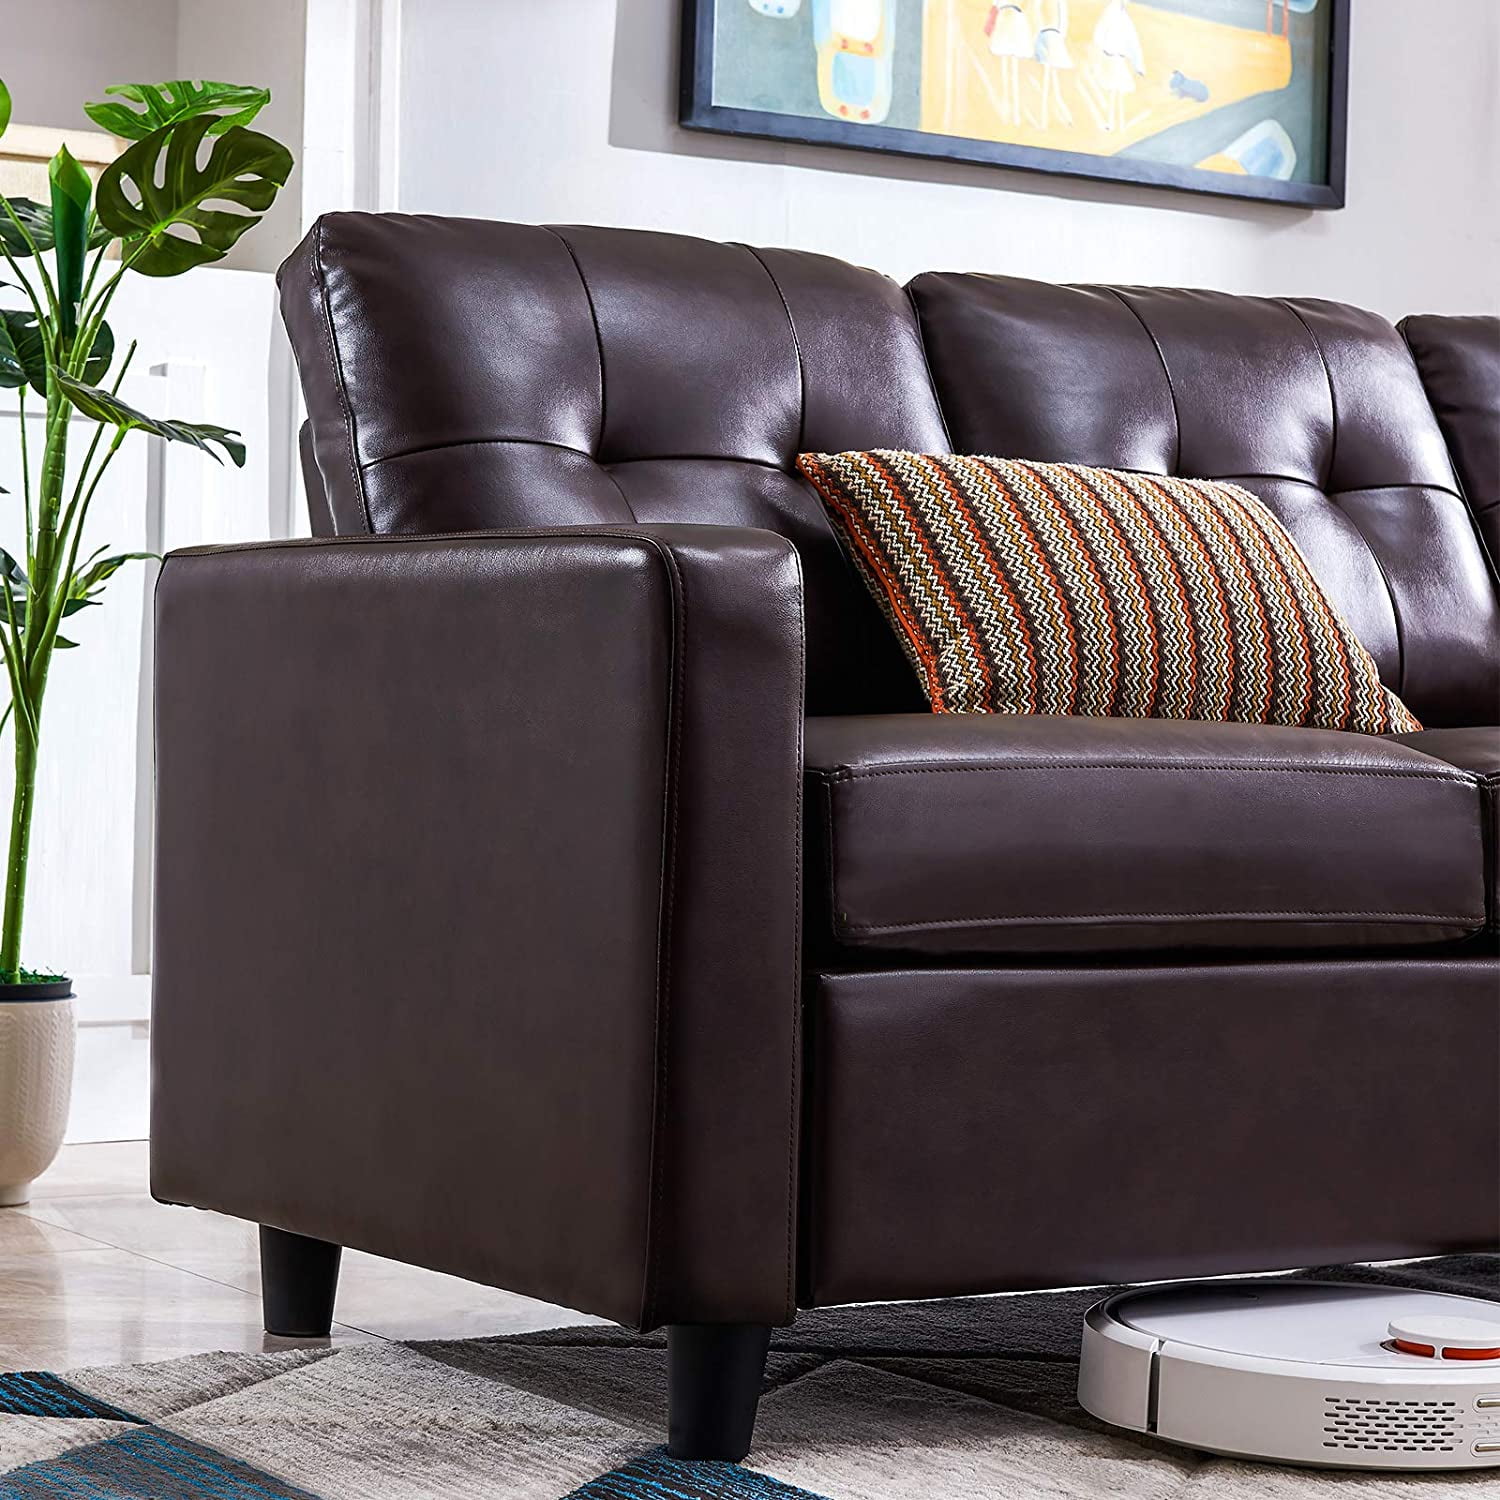 HONBAY Convertible Sectional Sofa Couch Leather L-Shape Couch with Modern Faux Leather Sectional for Small Space Apartment Brown